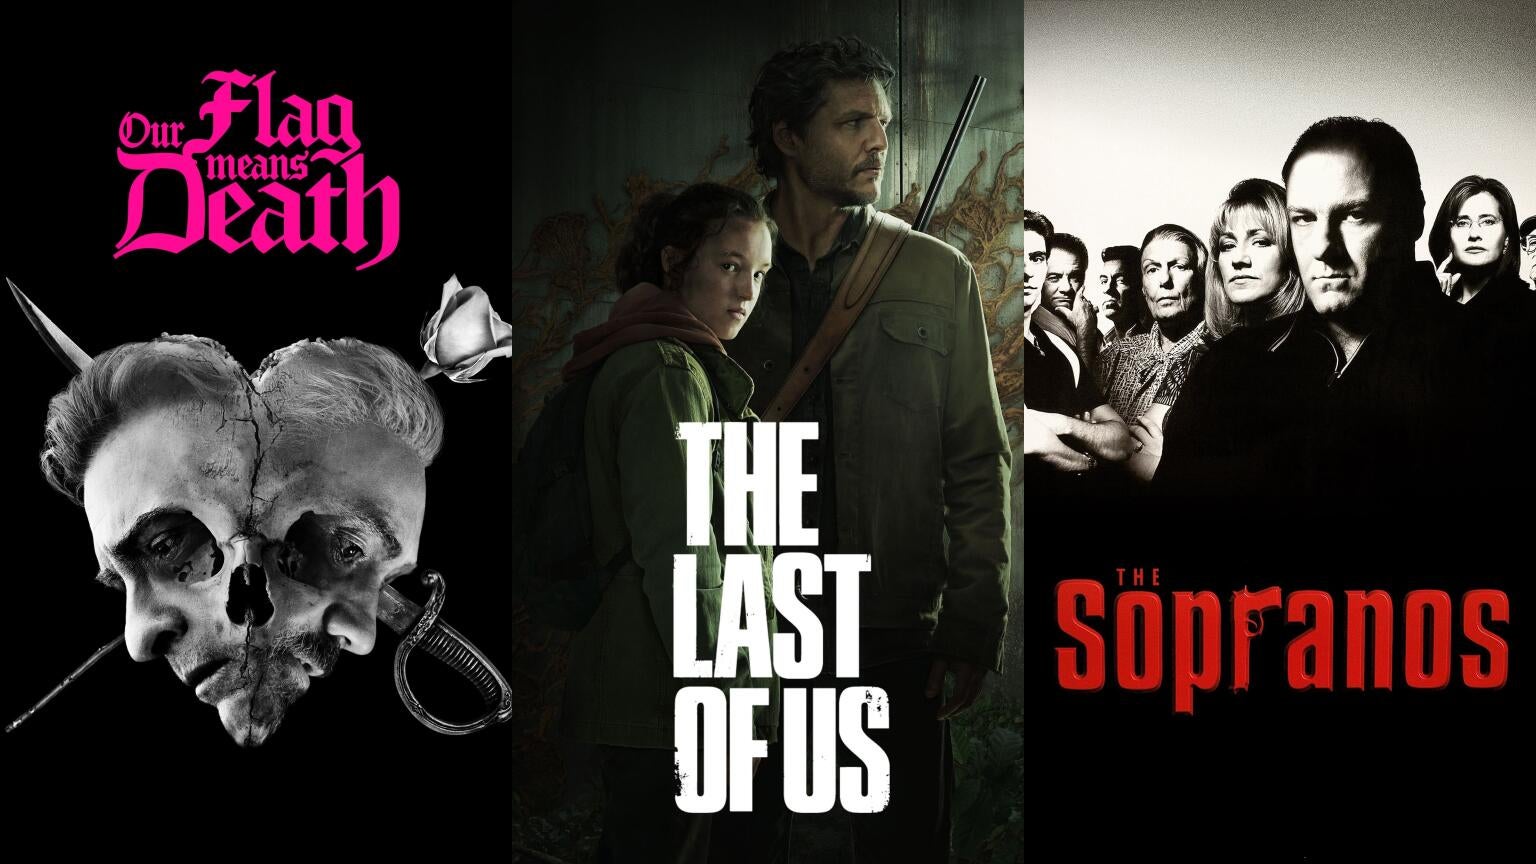 The Last of Us' Season 2 - Cast, News, Updates, and More